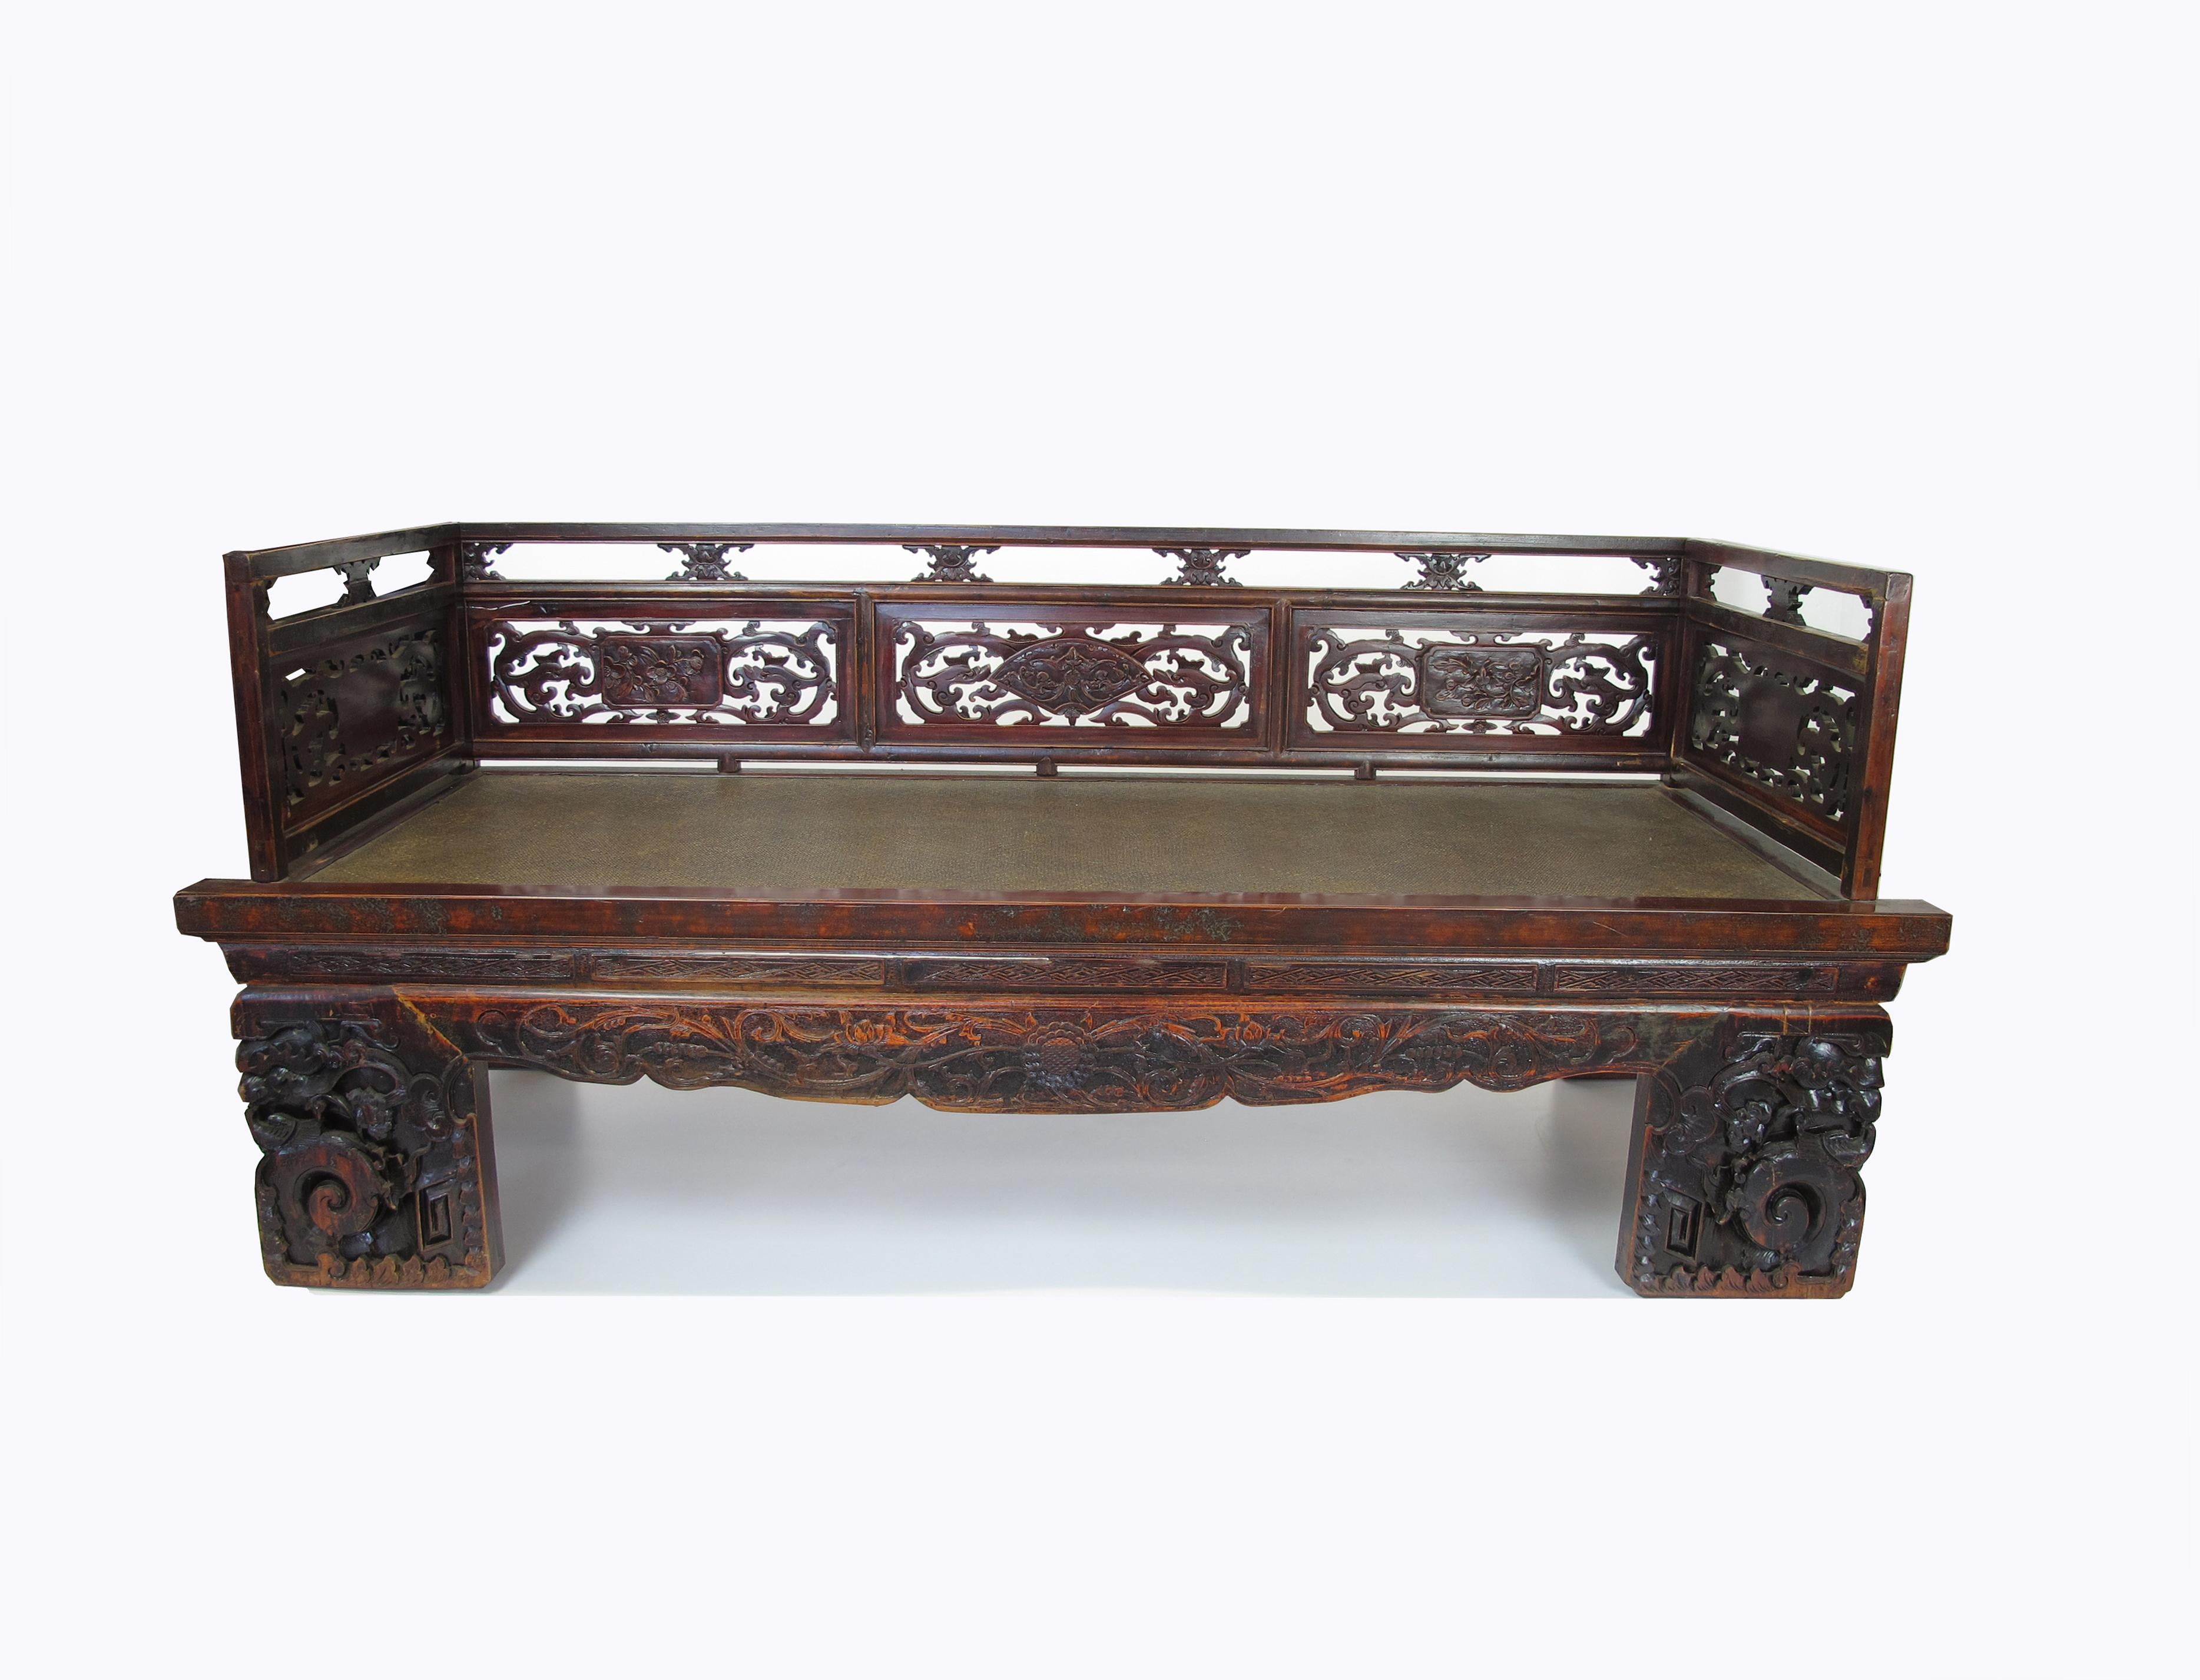 With its beautifully hand carved railing, front apron and legs, this over a century old antique Chinese Luohan bed makes a show piece daybed or love seat in any room. Using traditional tenon and mortise joinery, this solid elm daybed is not just a